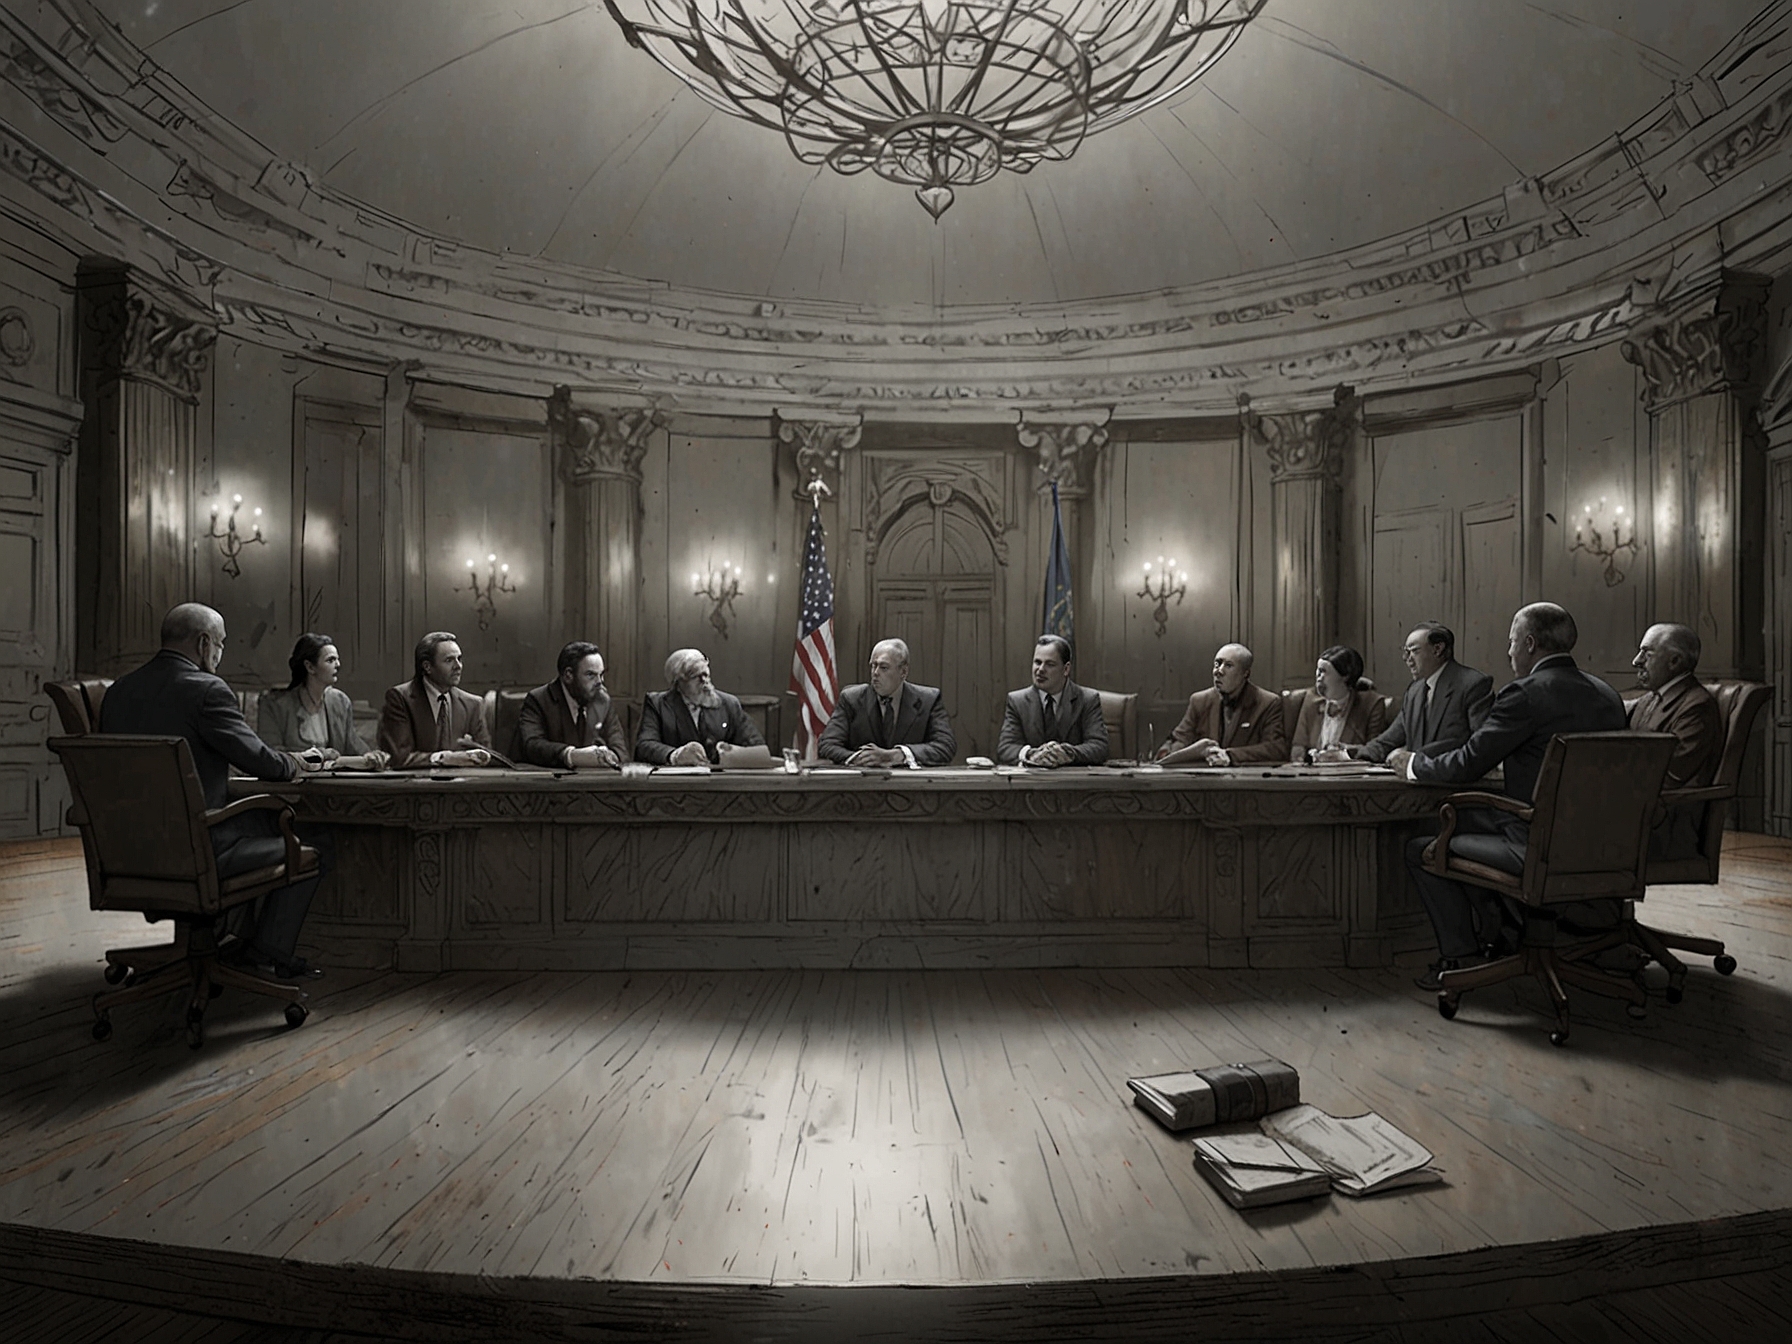 A tense council meeting opens the premiere, showcasing the intricate political maneuvers and schemes among the noble houses. The detailed set design and costuming make the scene visually compelling.